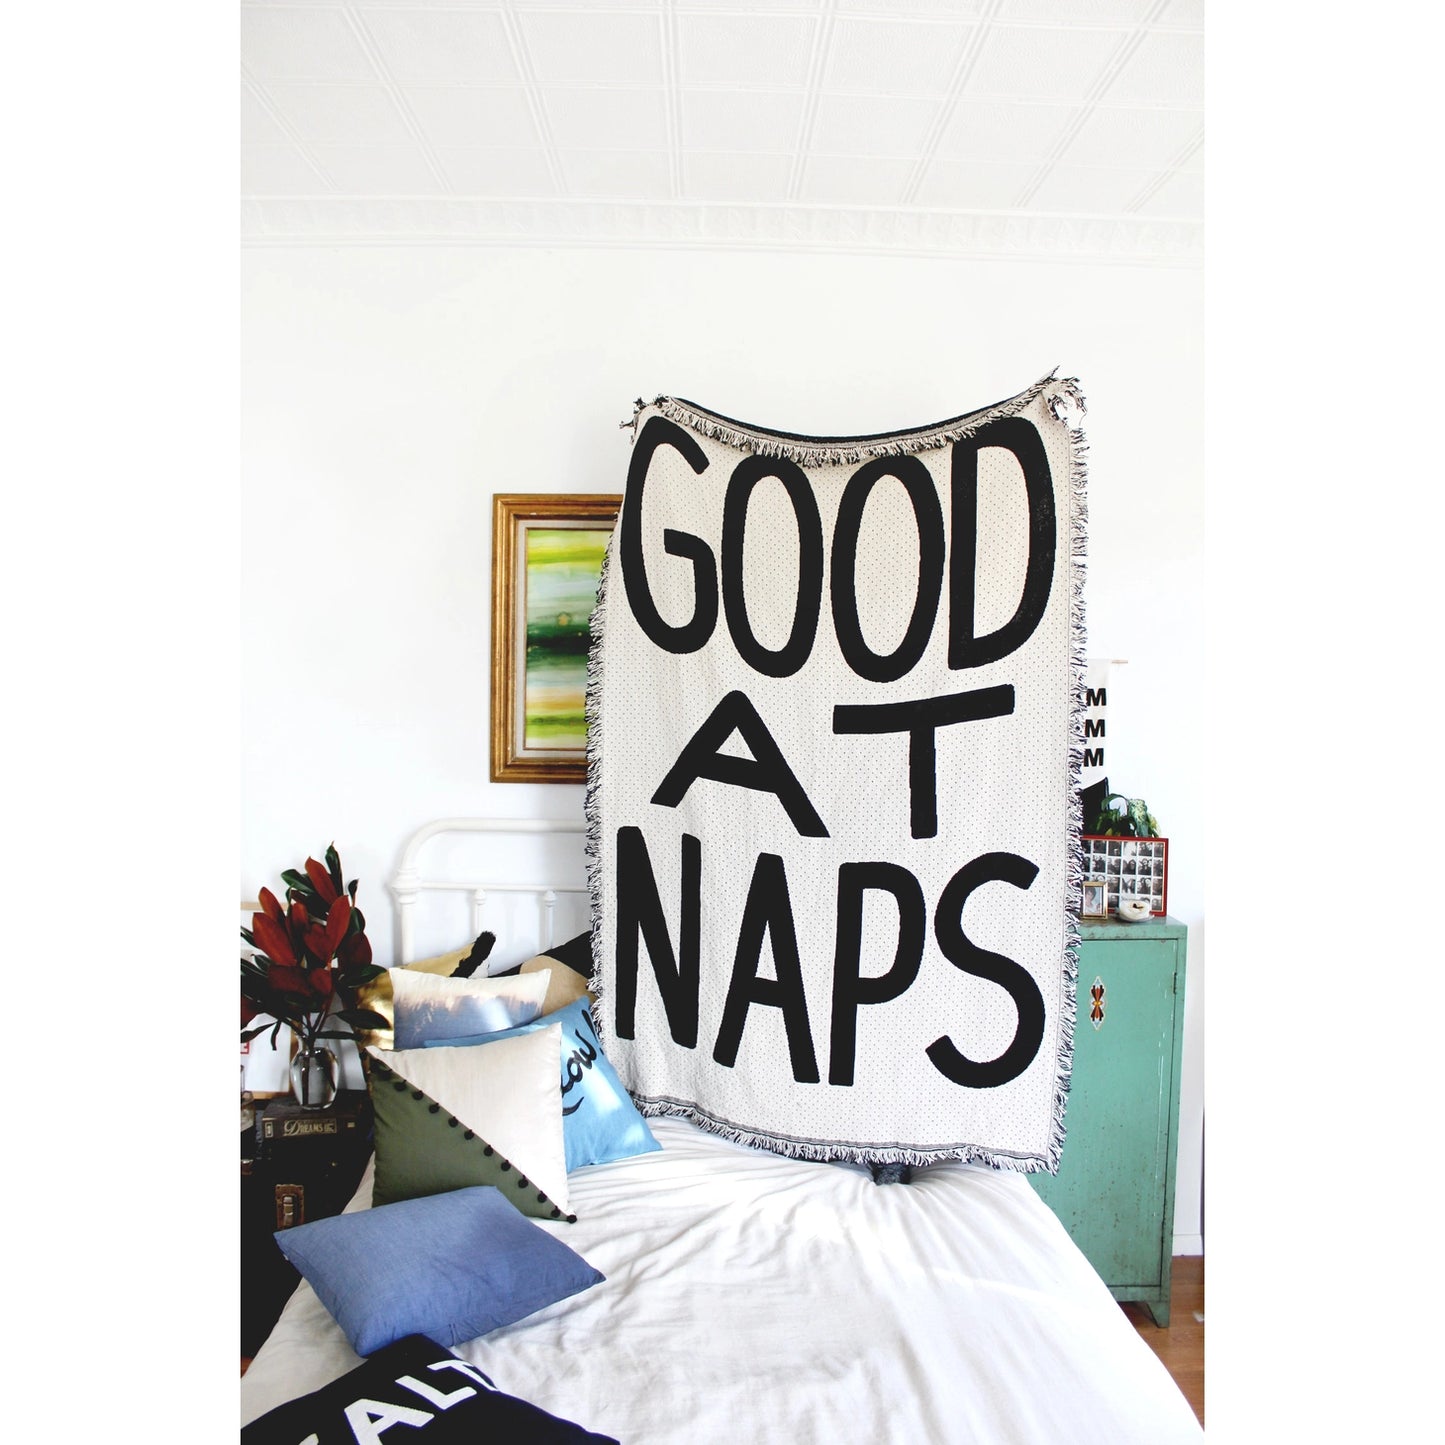 Good At Naps Knit Blanket made in the USA